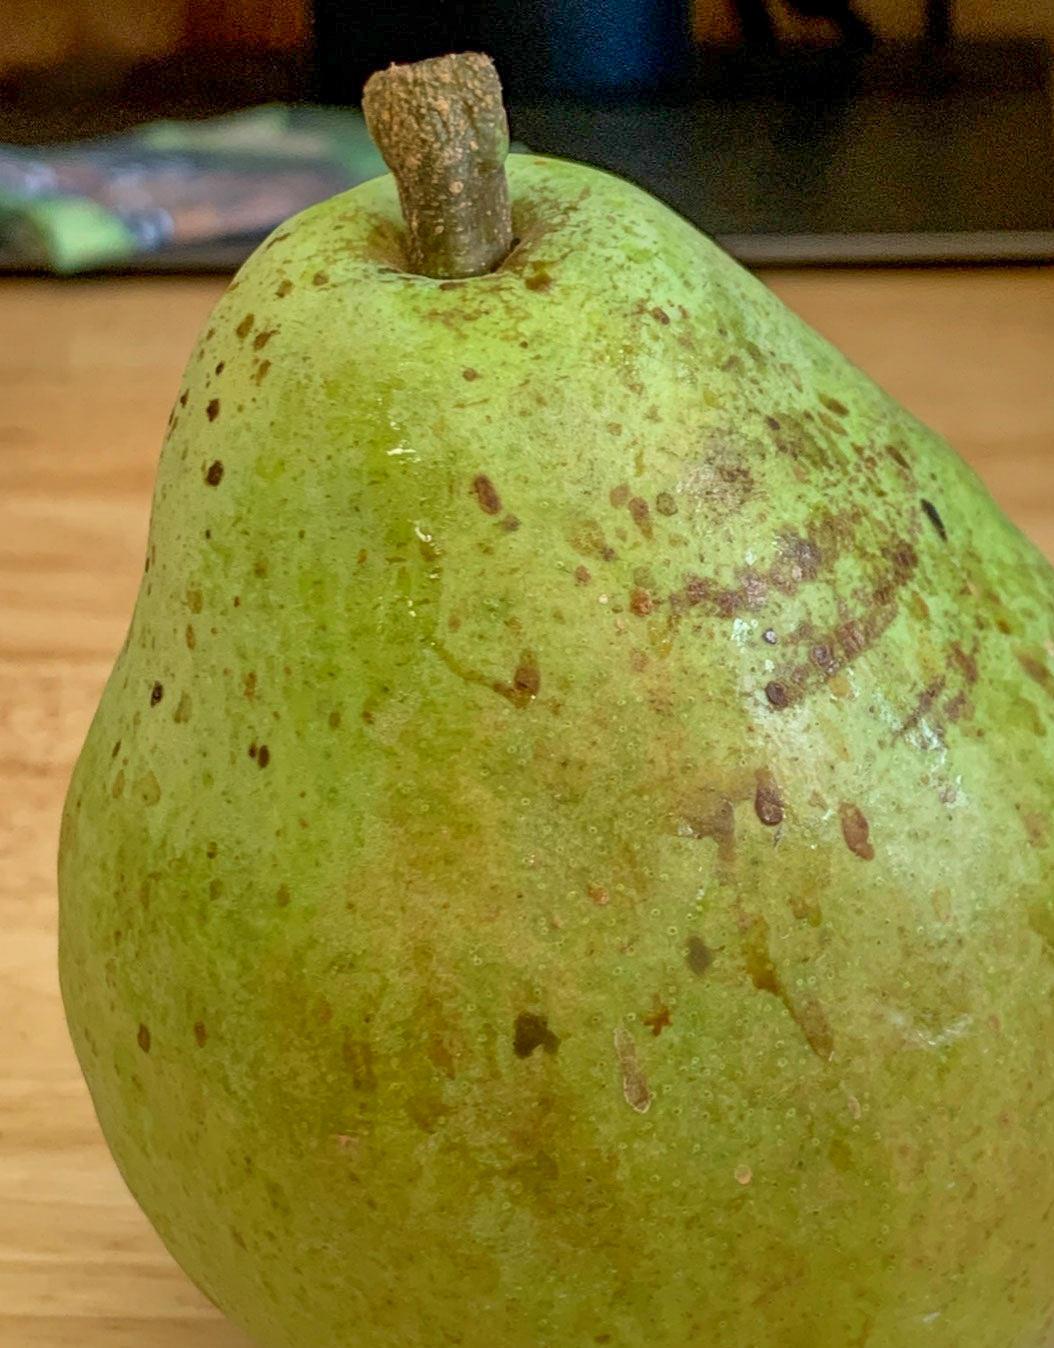 green pear with many brown markings on skin